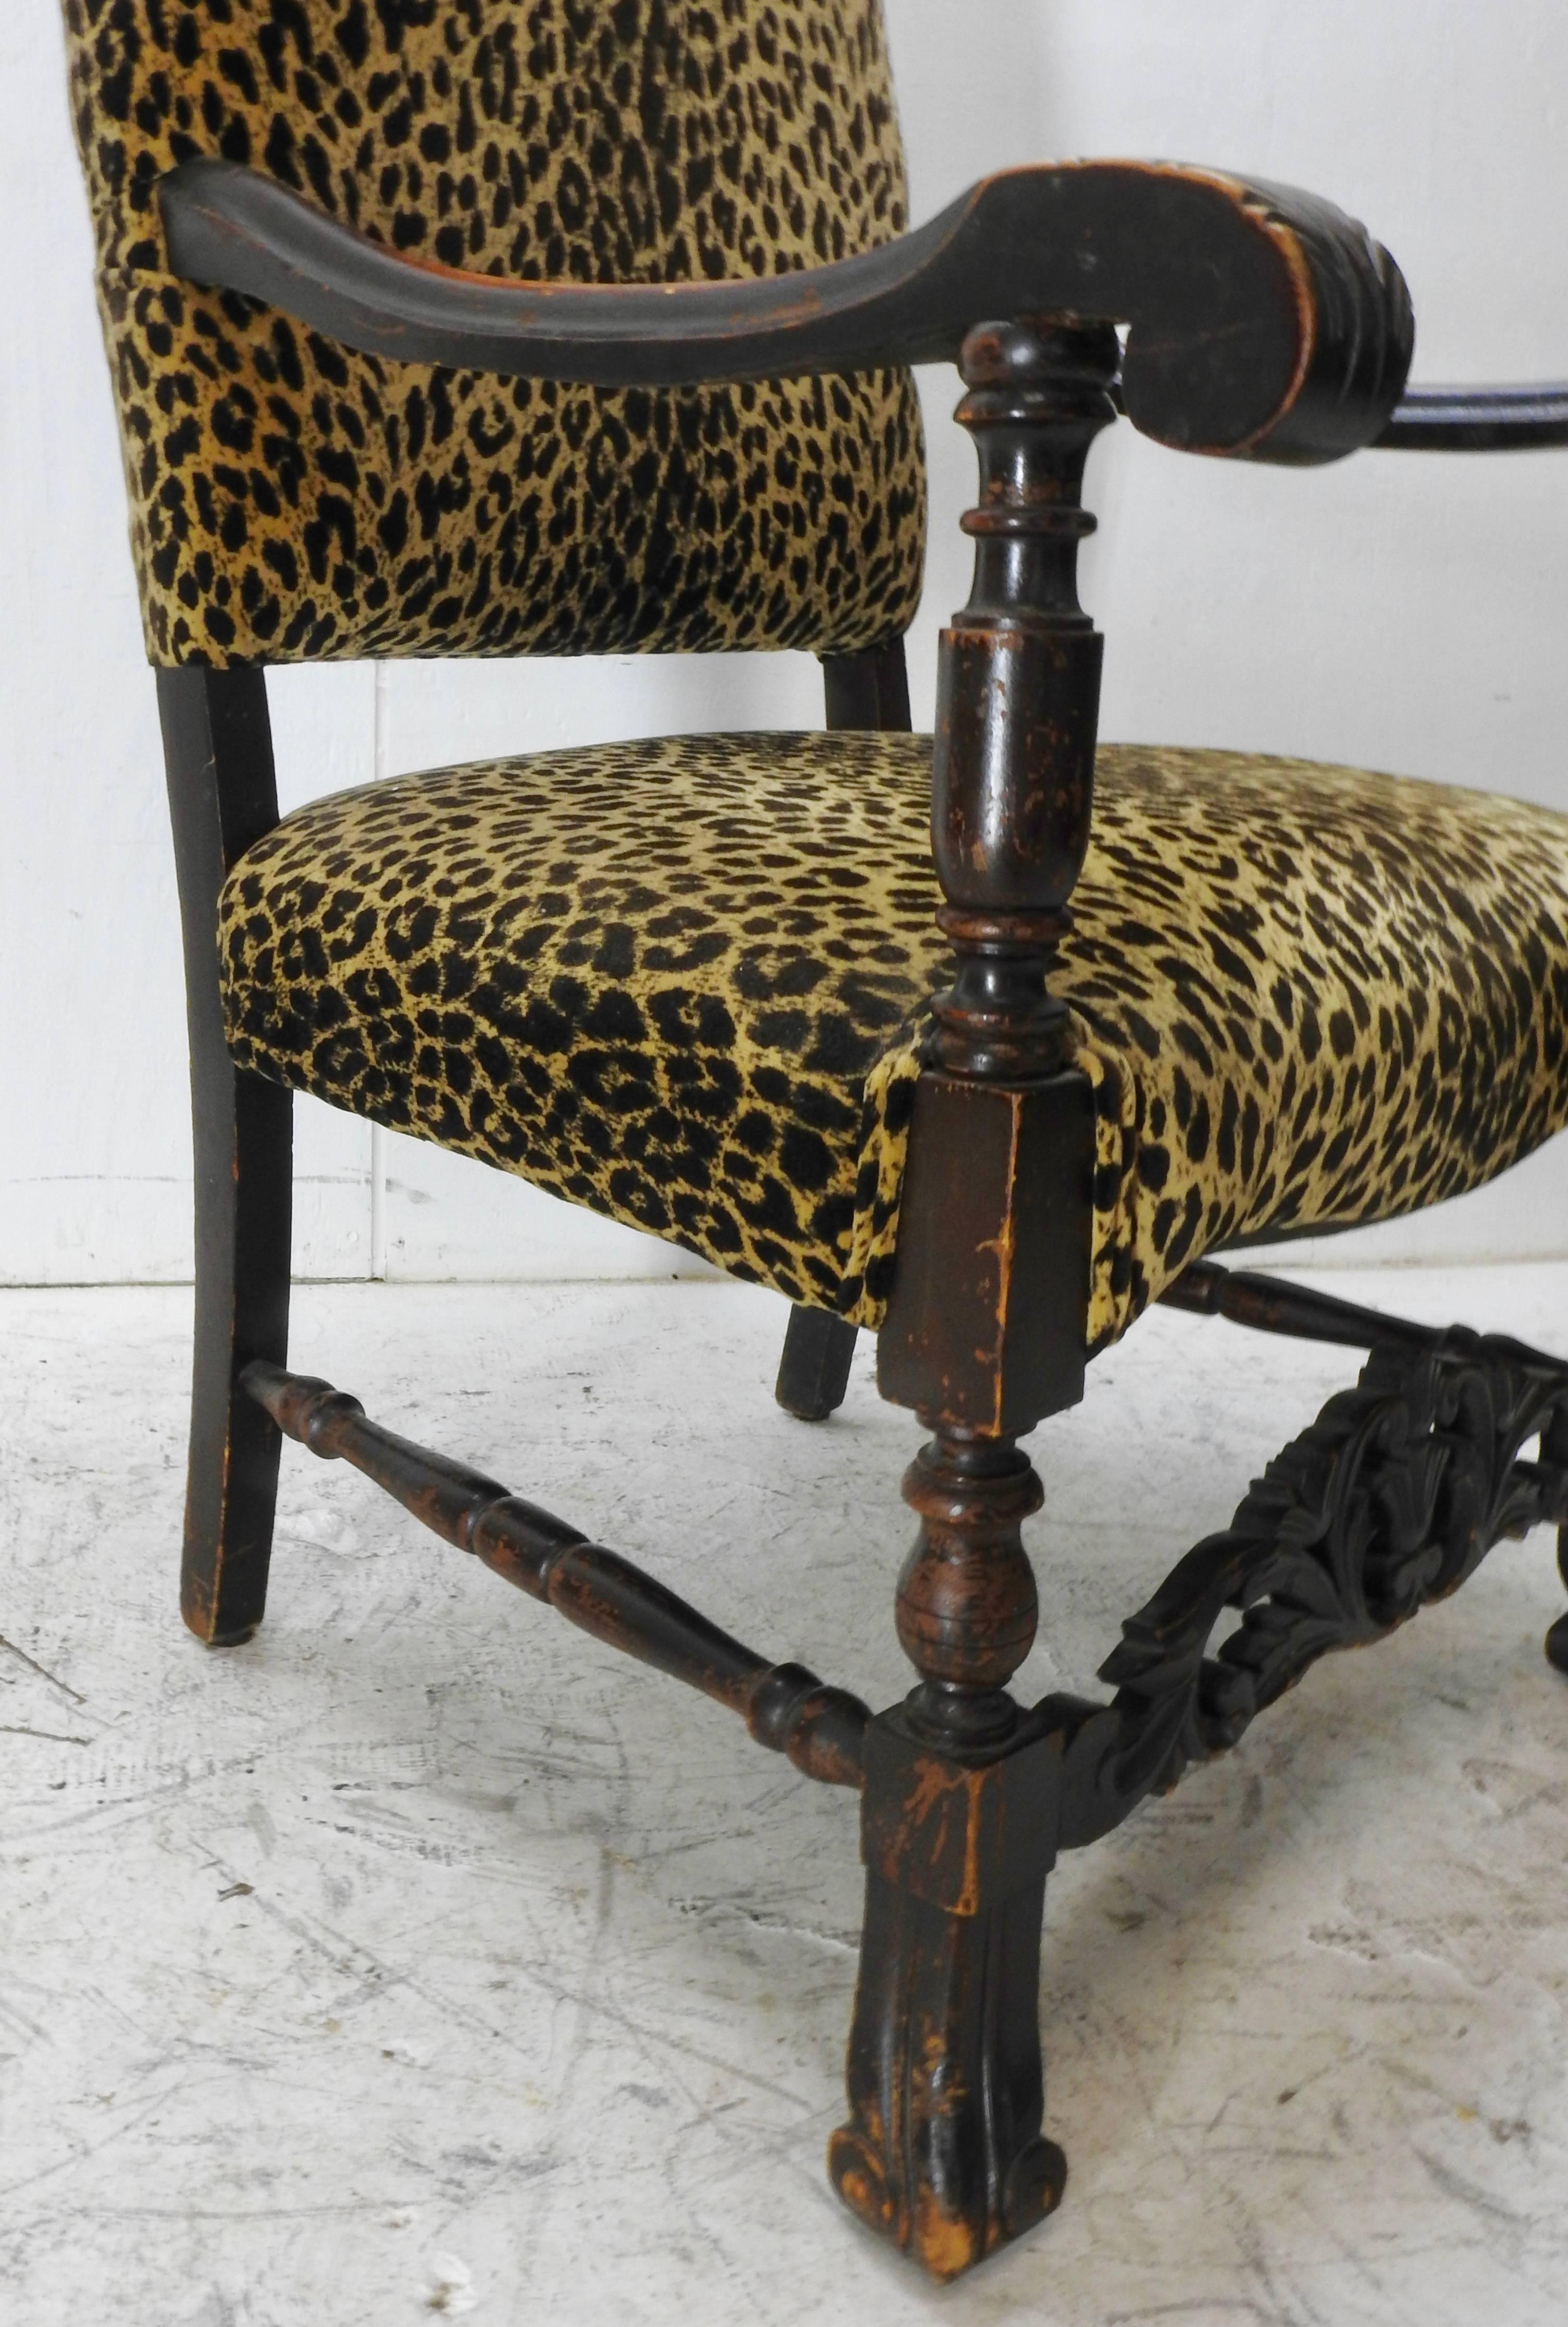 19th Century German Hand-Carved High Back Chair with Leopard Print Upholstery 3